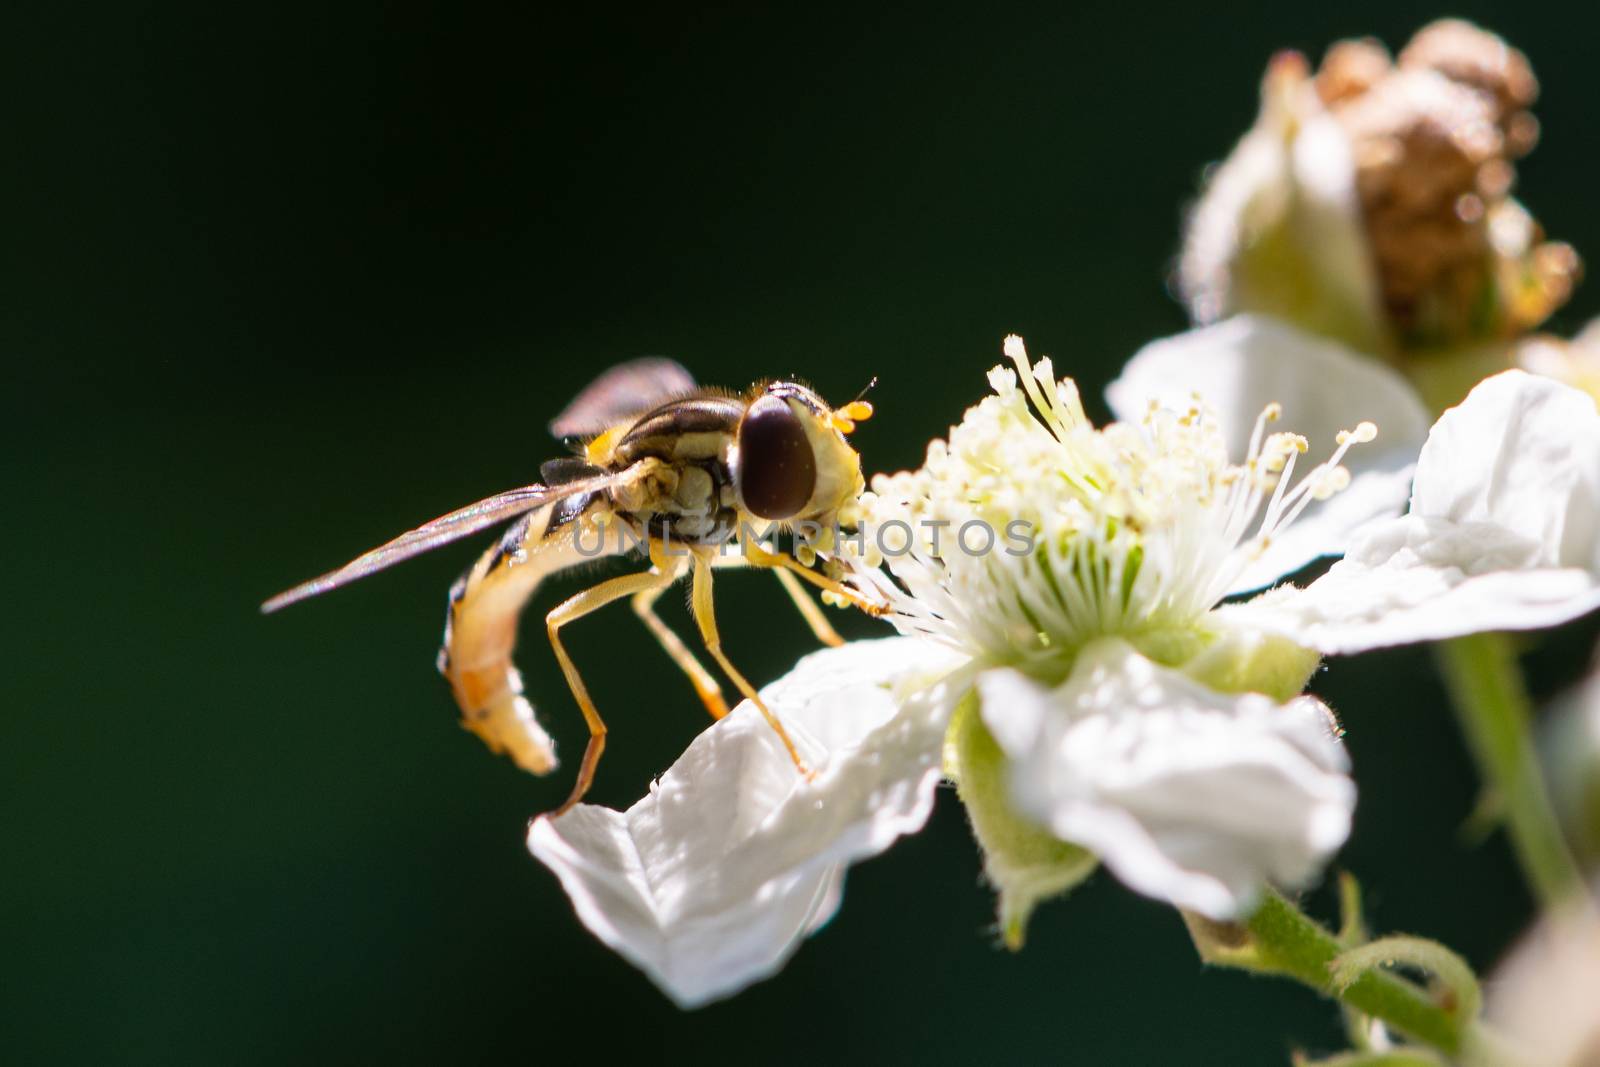 Hoverfly is laying on a white flower, image with a dark backgrou by brambillasimone